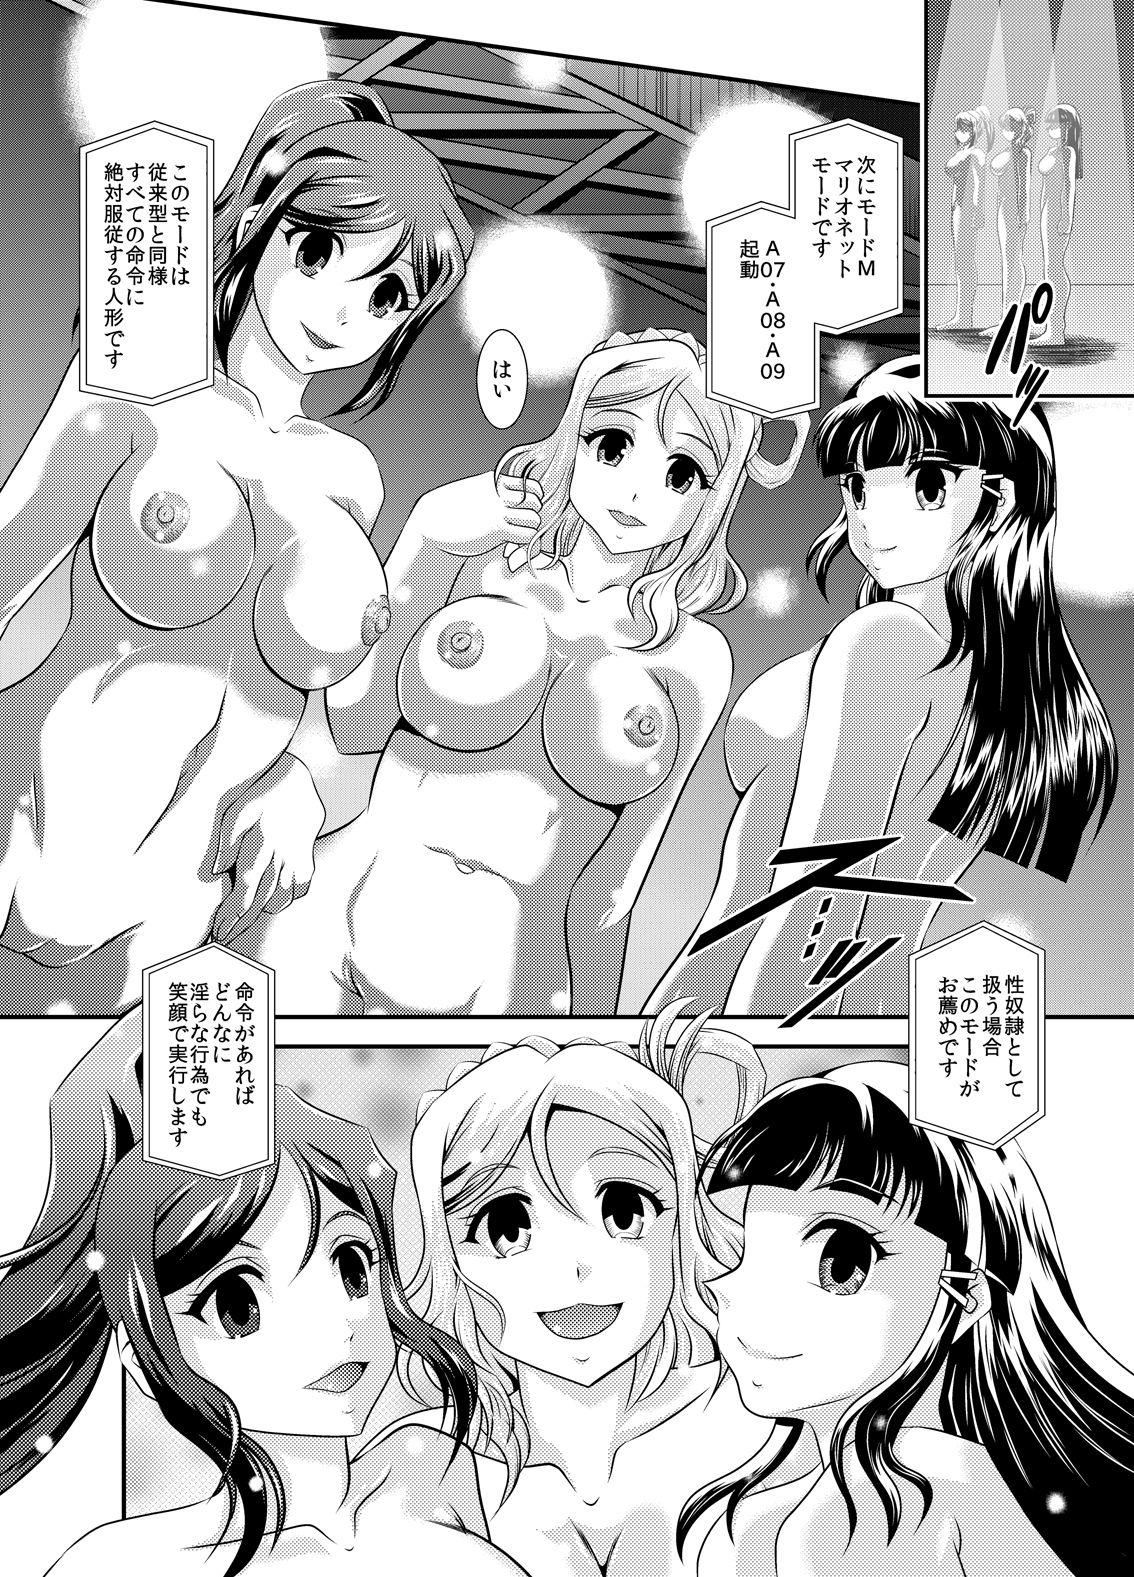 Rabo ProjectAqours EP04:HOPELESS - Love live sunshine Girl Gets Fucked - Page 8